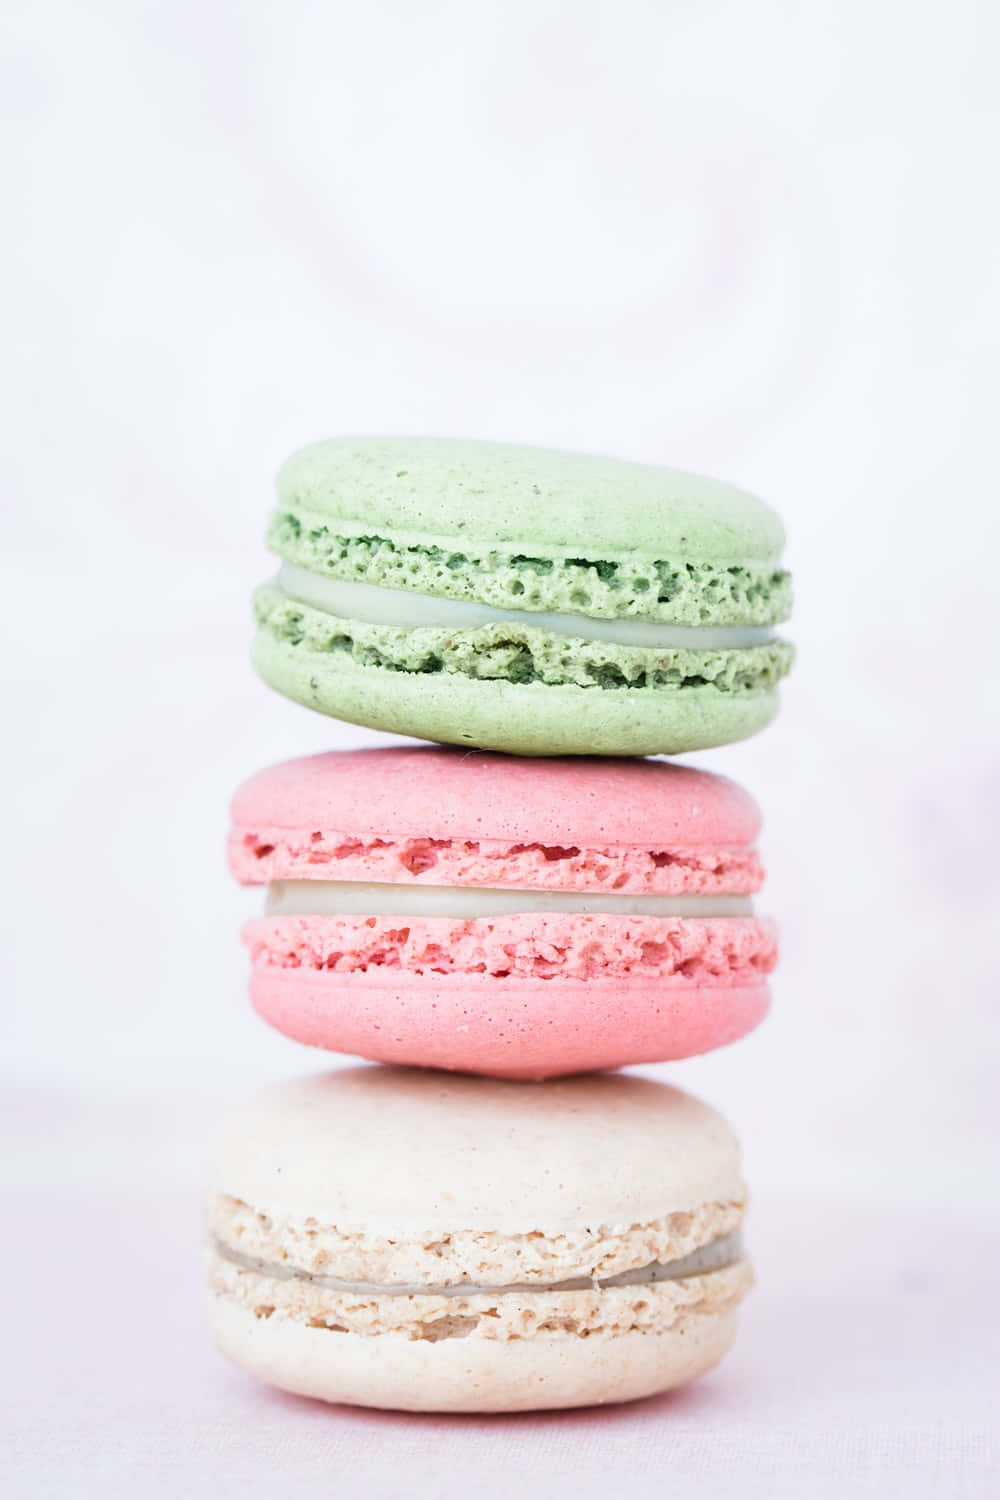 Download Macarons Pictures | Wallpapers.com